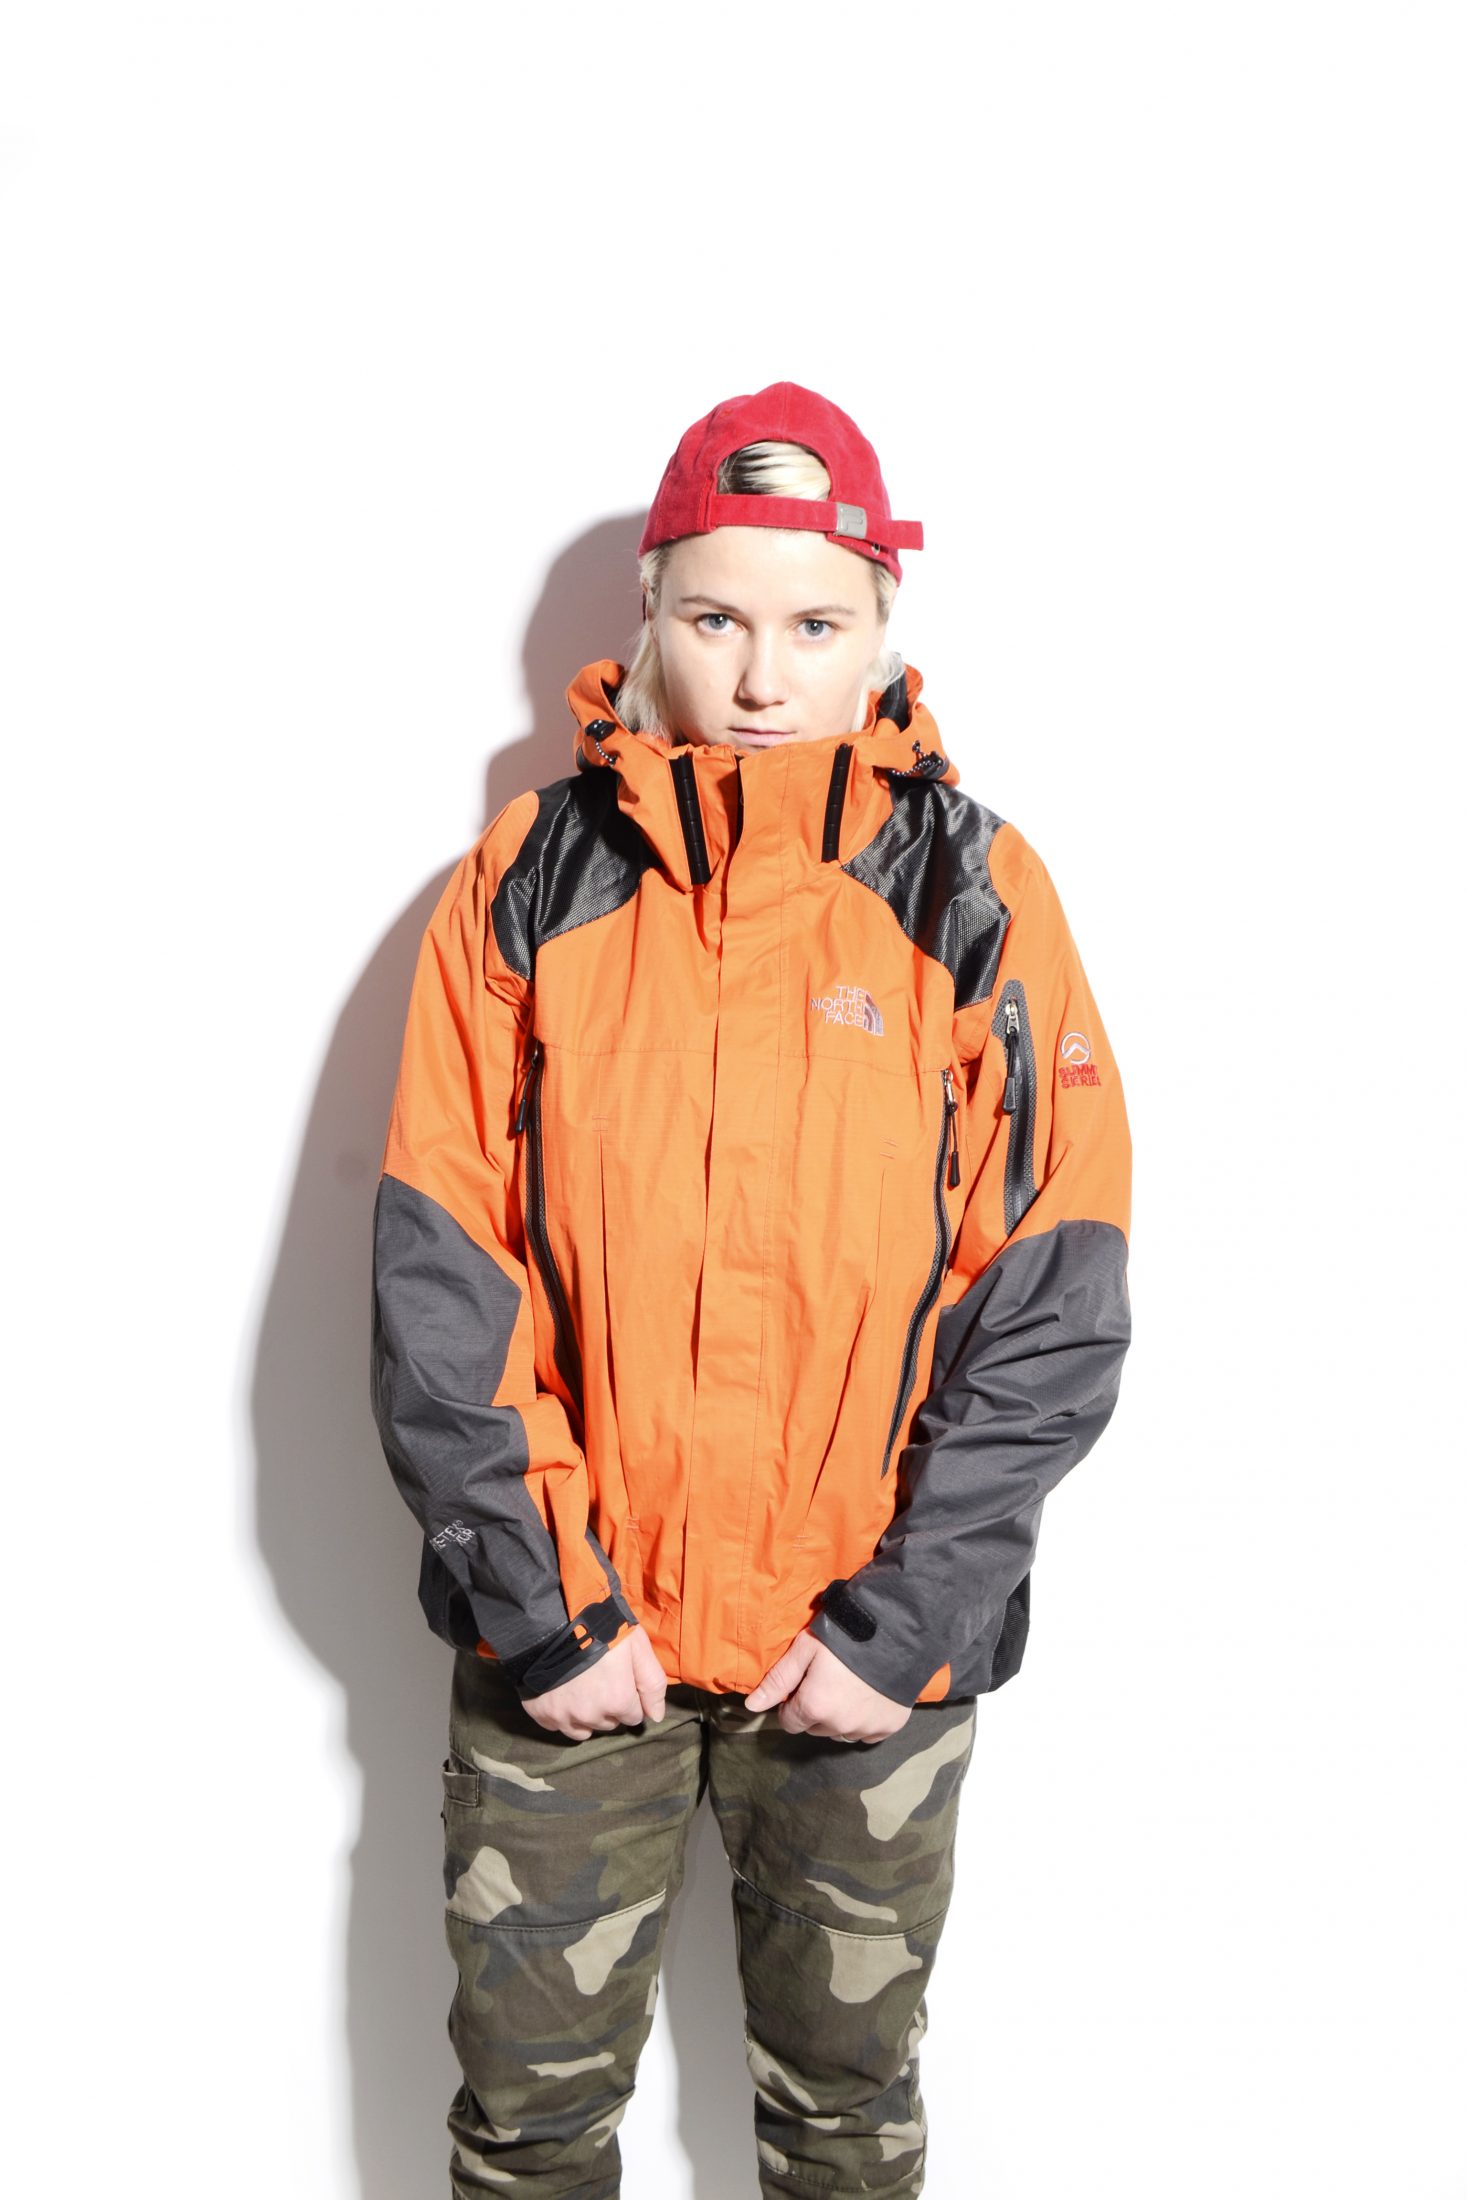 The North Face GORE-TEX jacket | WATERPROOF SHELL JACKET